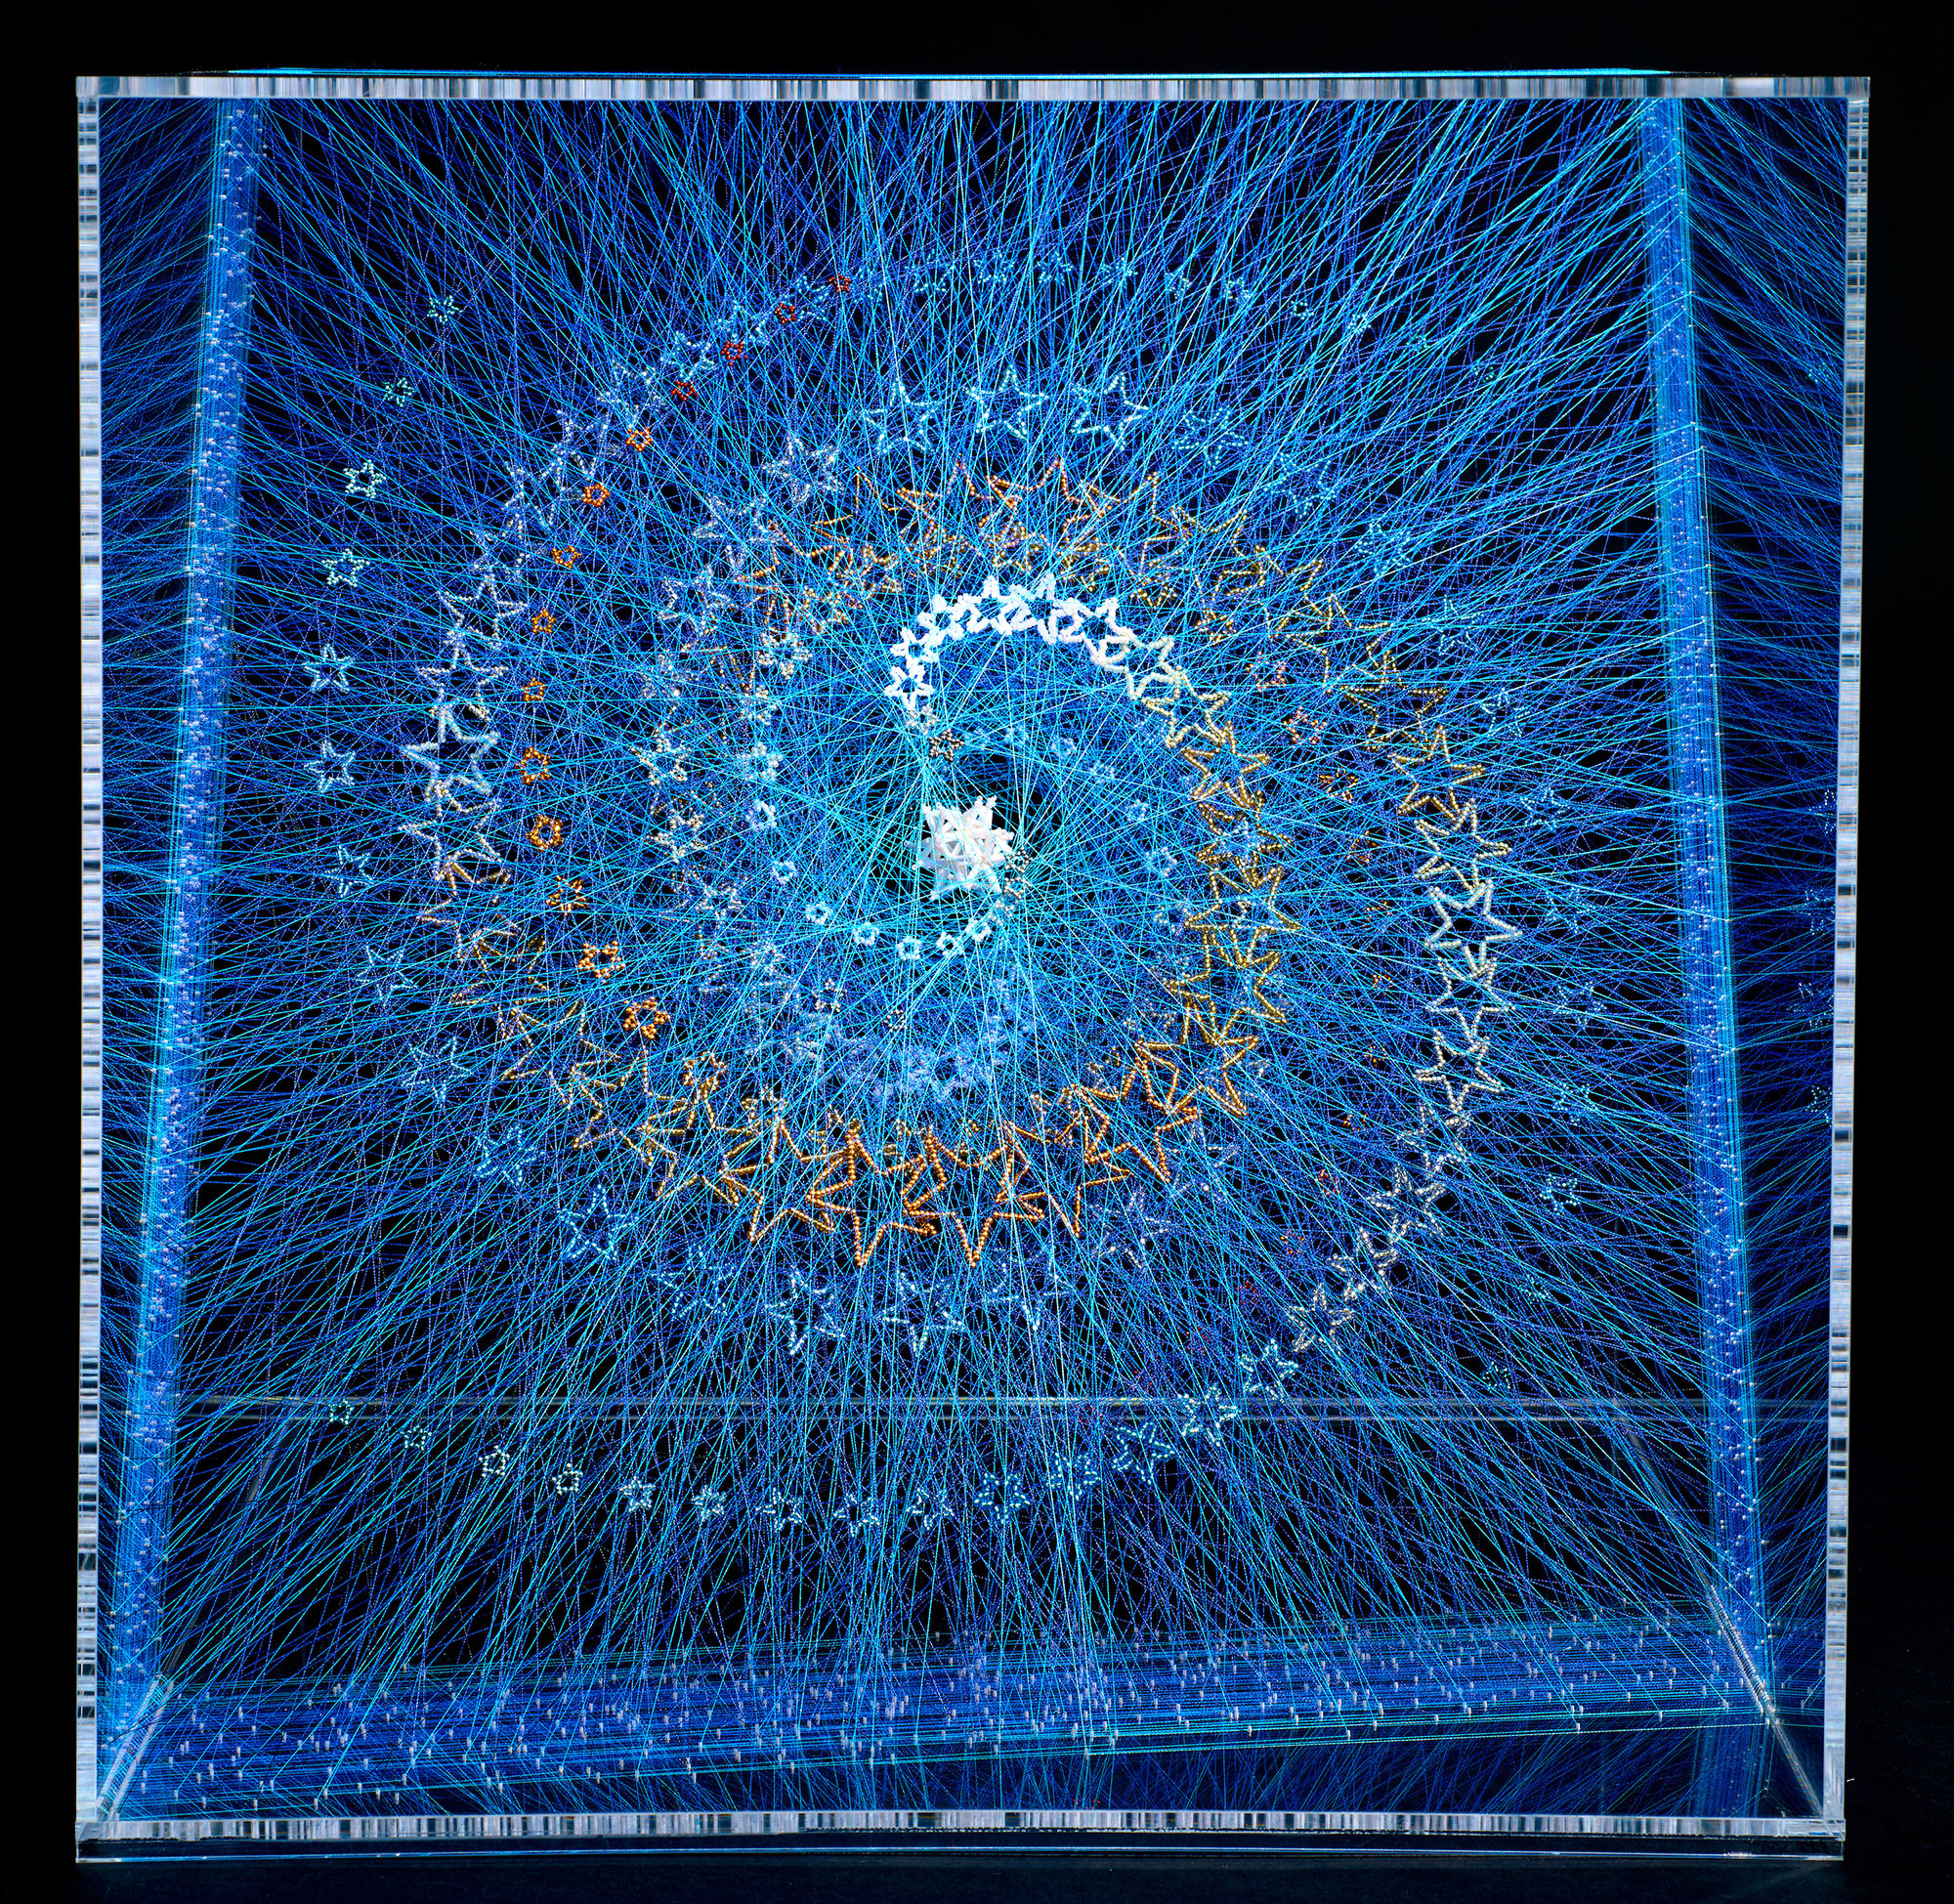 Isobel Currie, Woven Star Galaxy